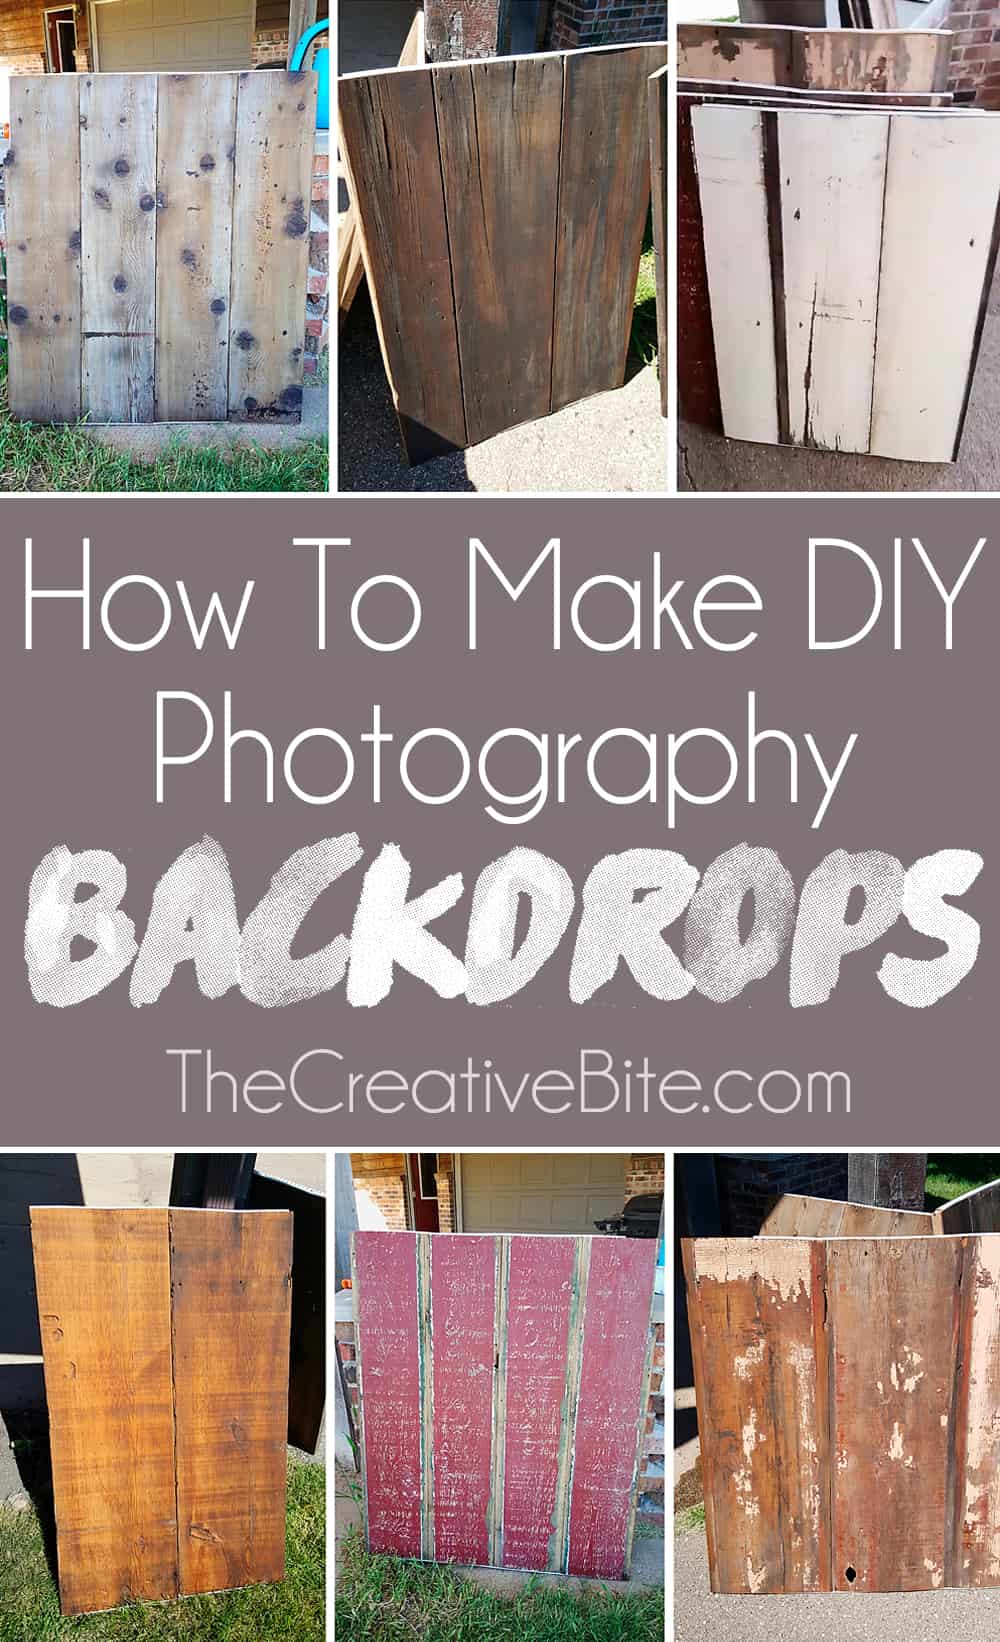 How to Make DIY Wooden Photography Backdrops